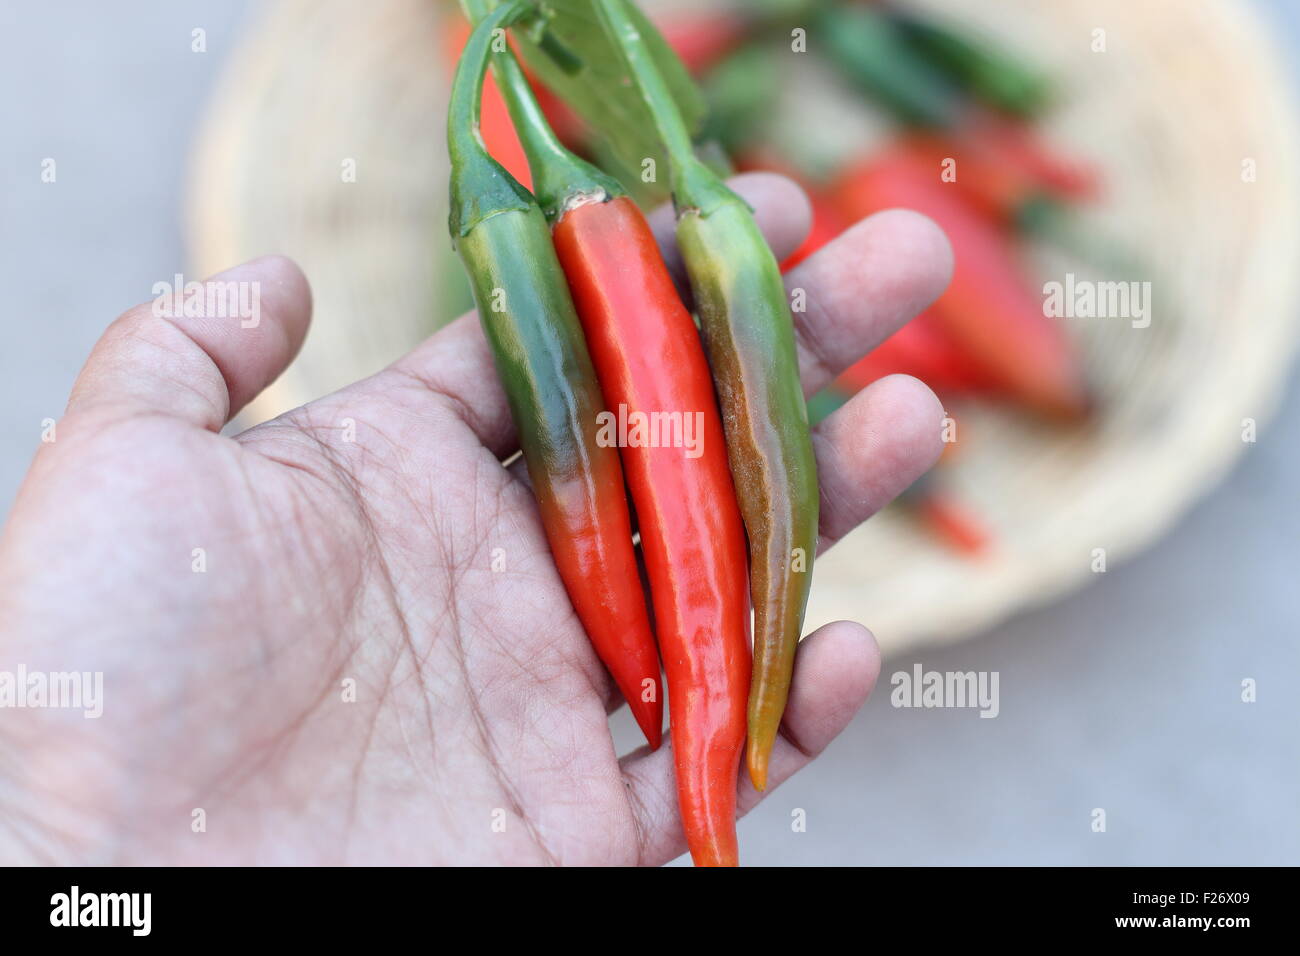 Holding home grown fresh long green and red chillies in hand Stock Photo